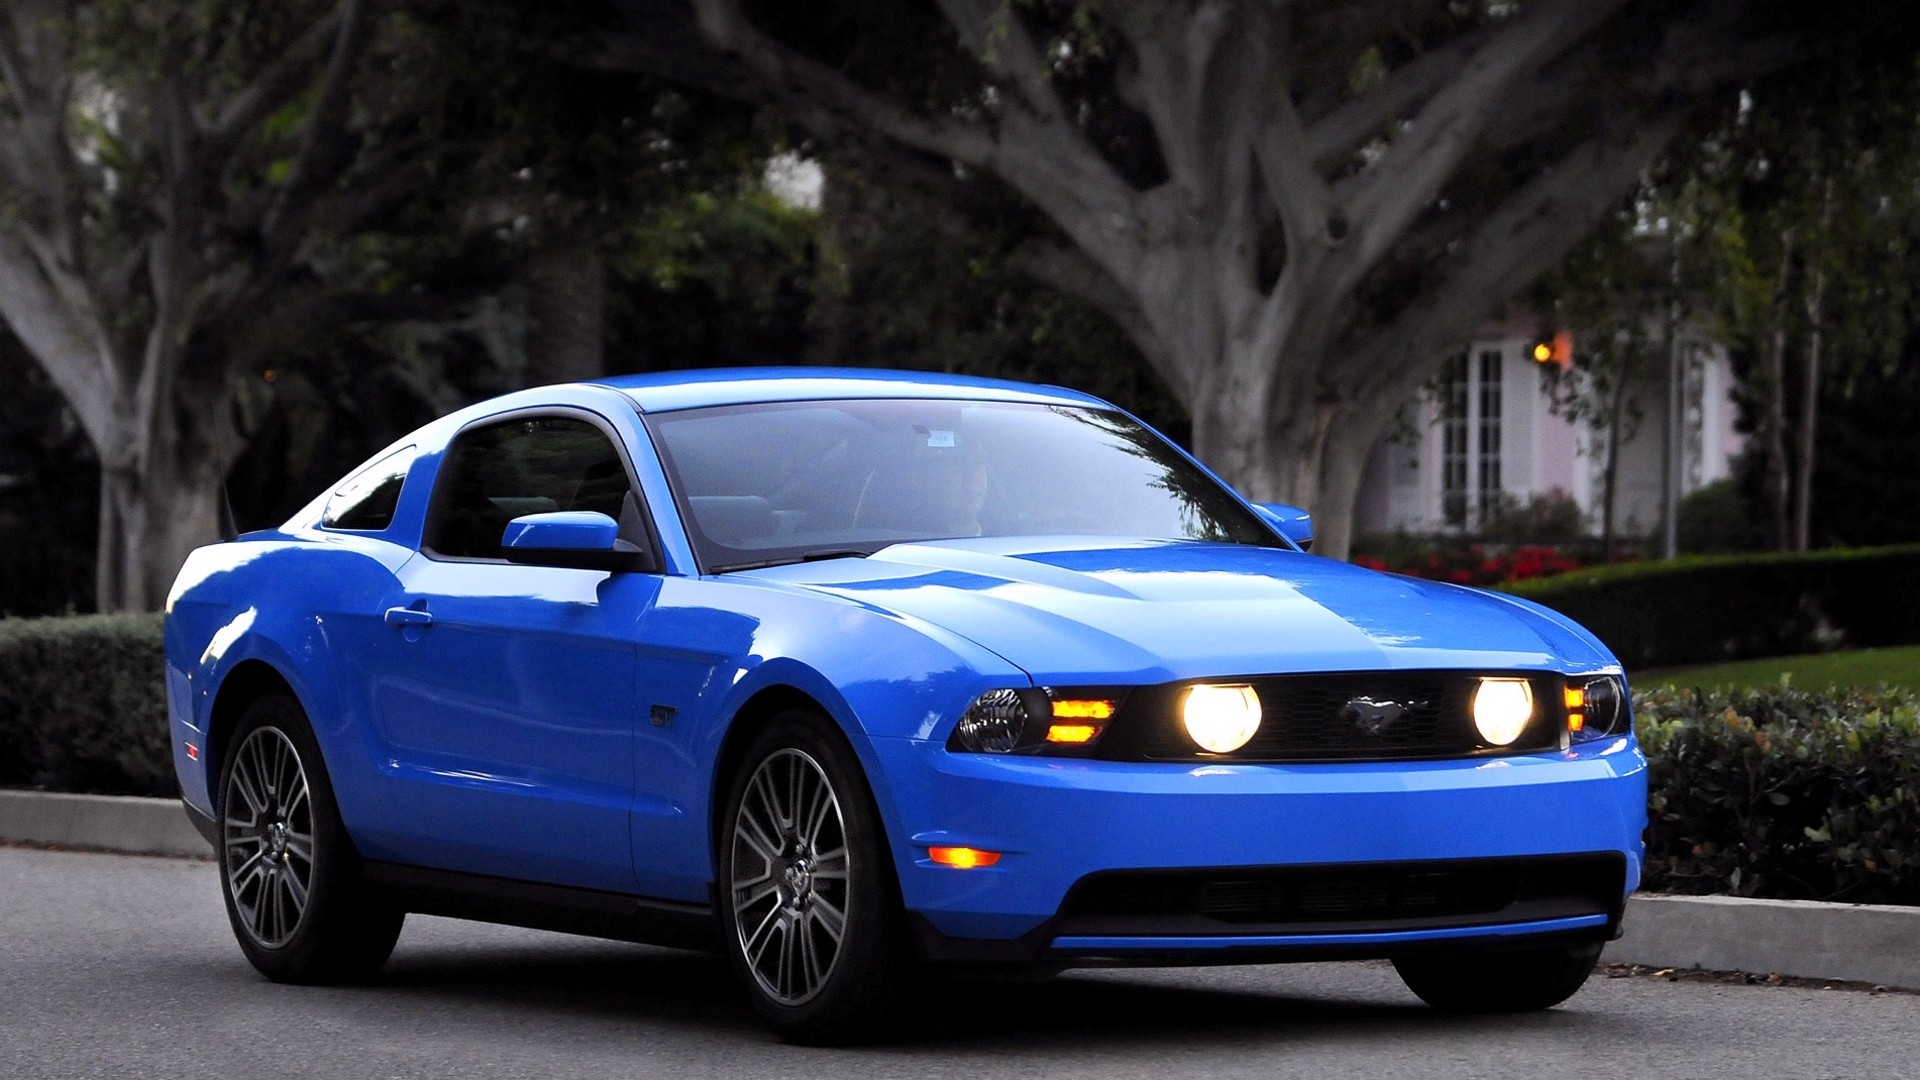 cars, Ford, vehicles, Ford Mustang, side view - desktop wallpaper